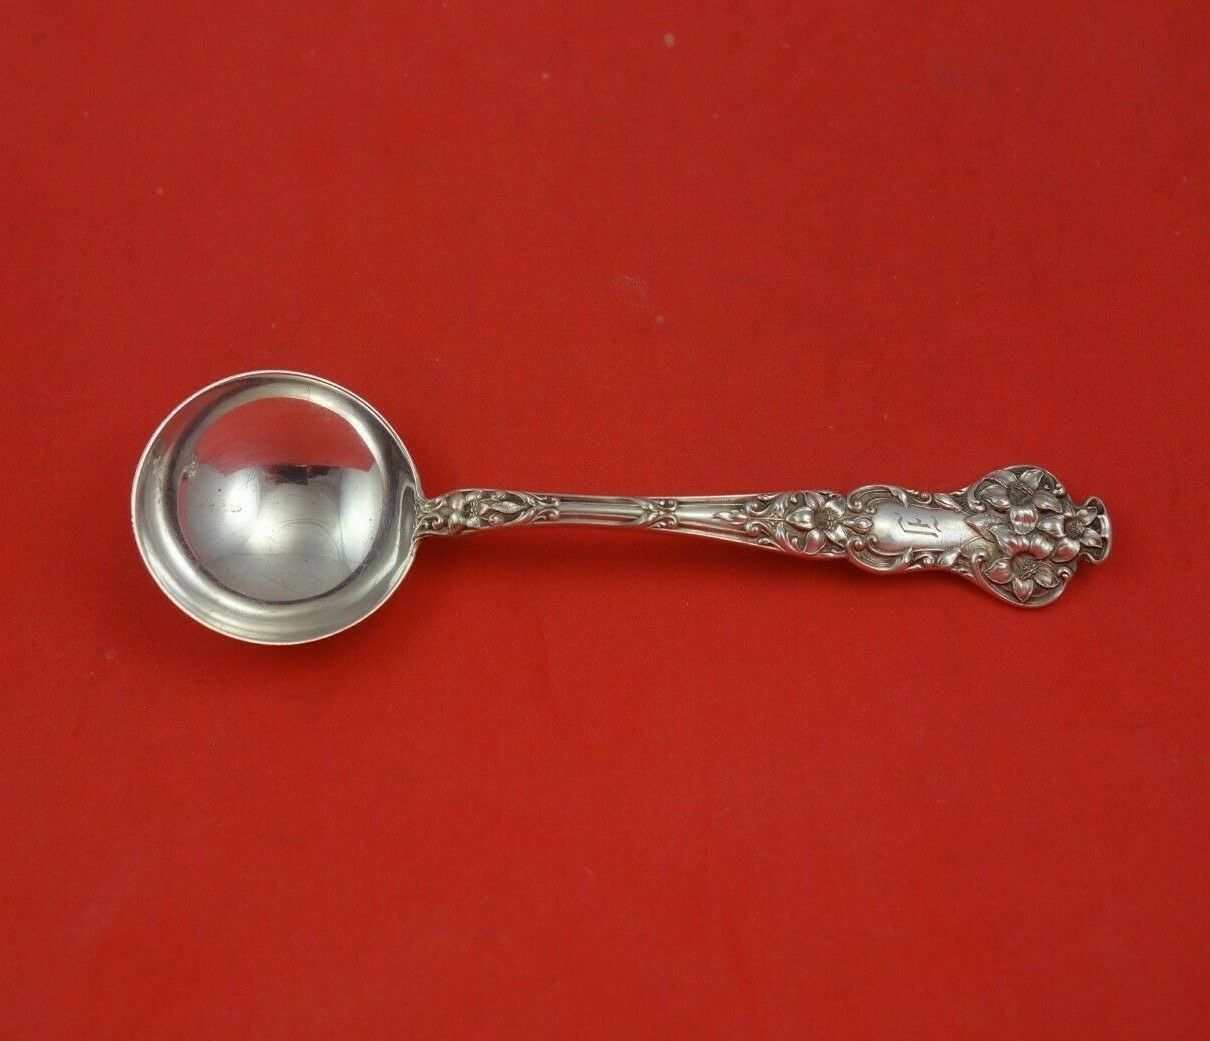 Primary image for Bridal Flower by Watson Sterling Silver Cream Soup Spoon 5 5/8" Heirloom